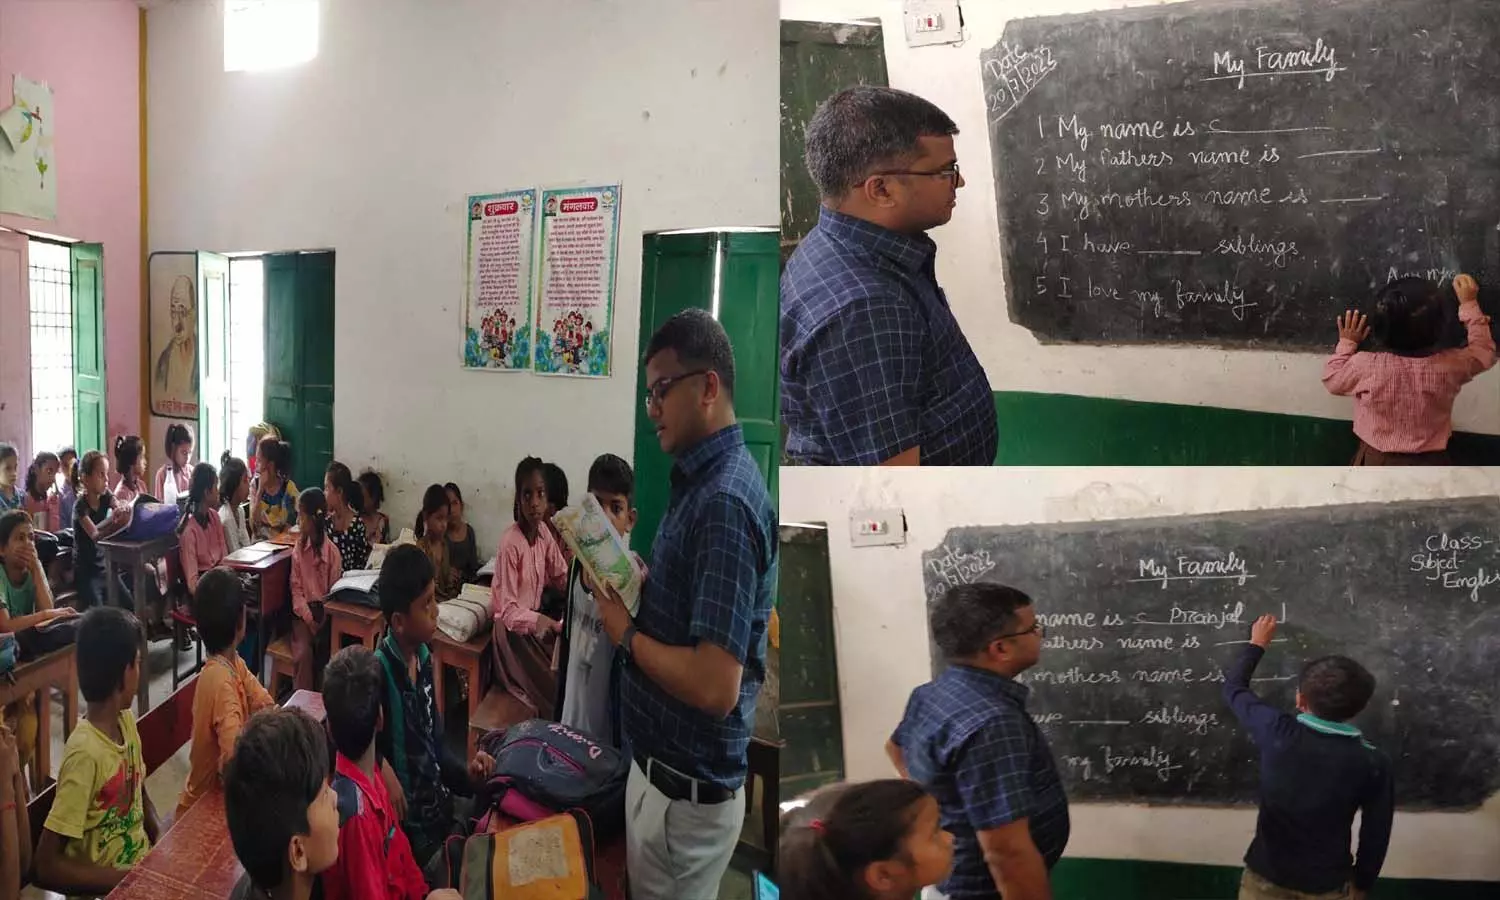 District Magistrate Manish Kumar Verma did a surprise inspection of the primary school